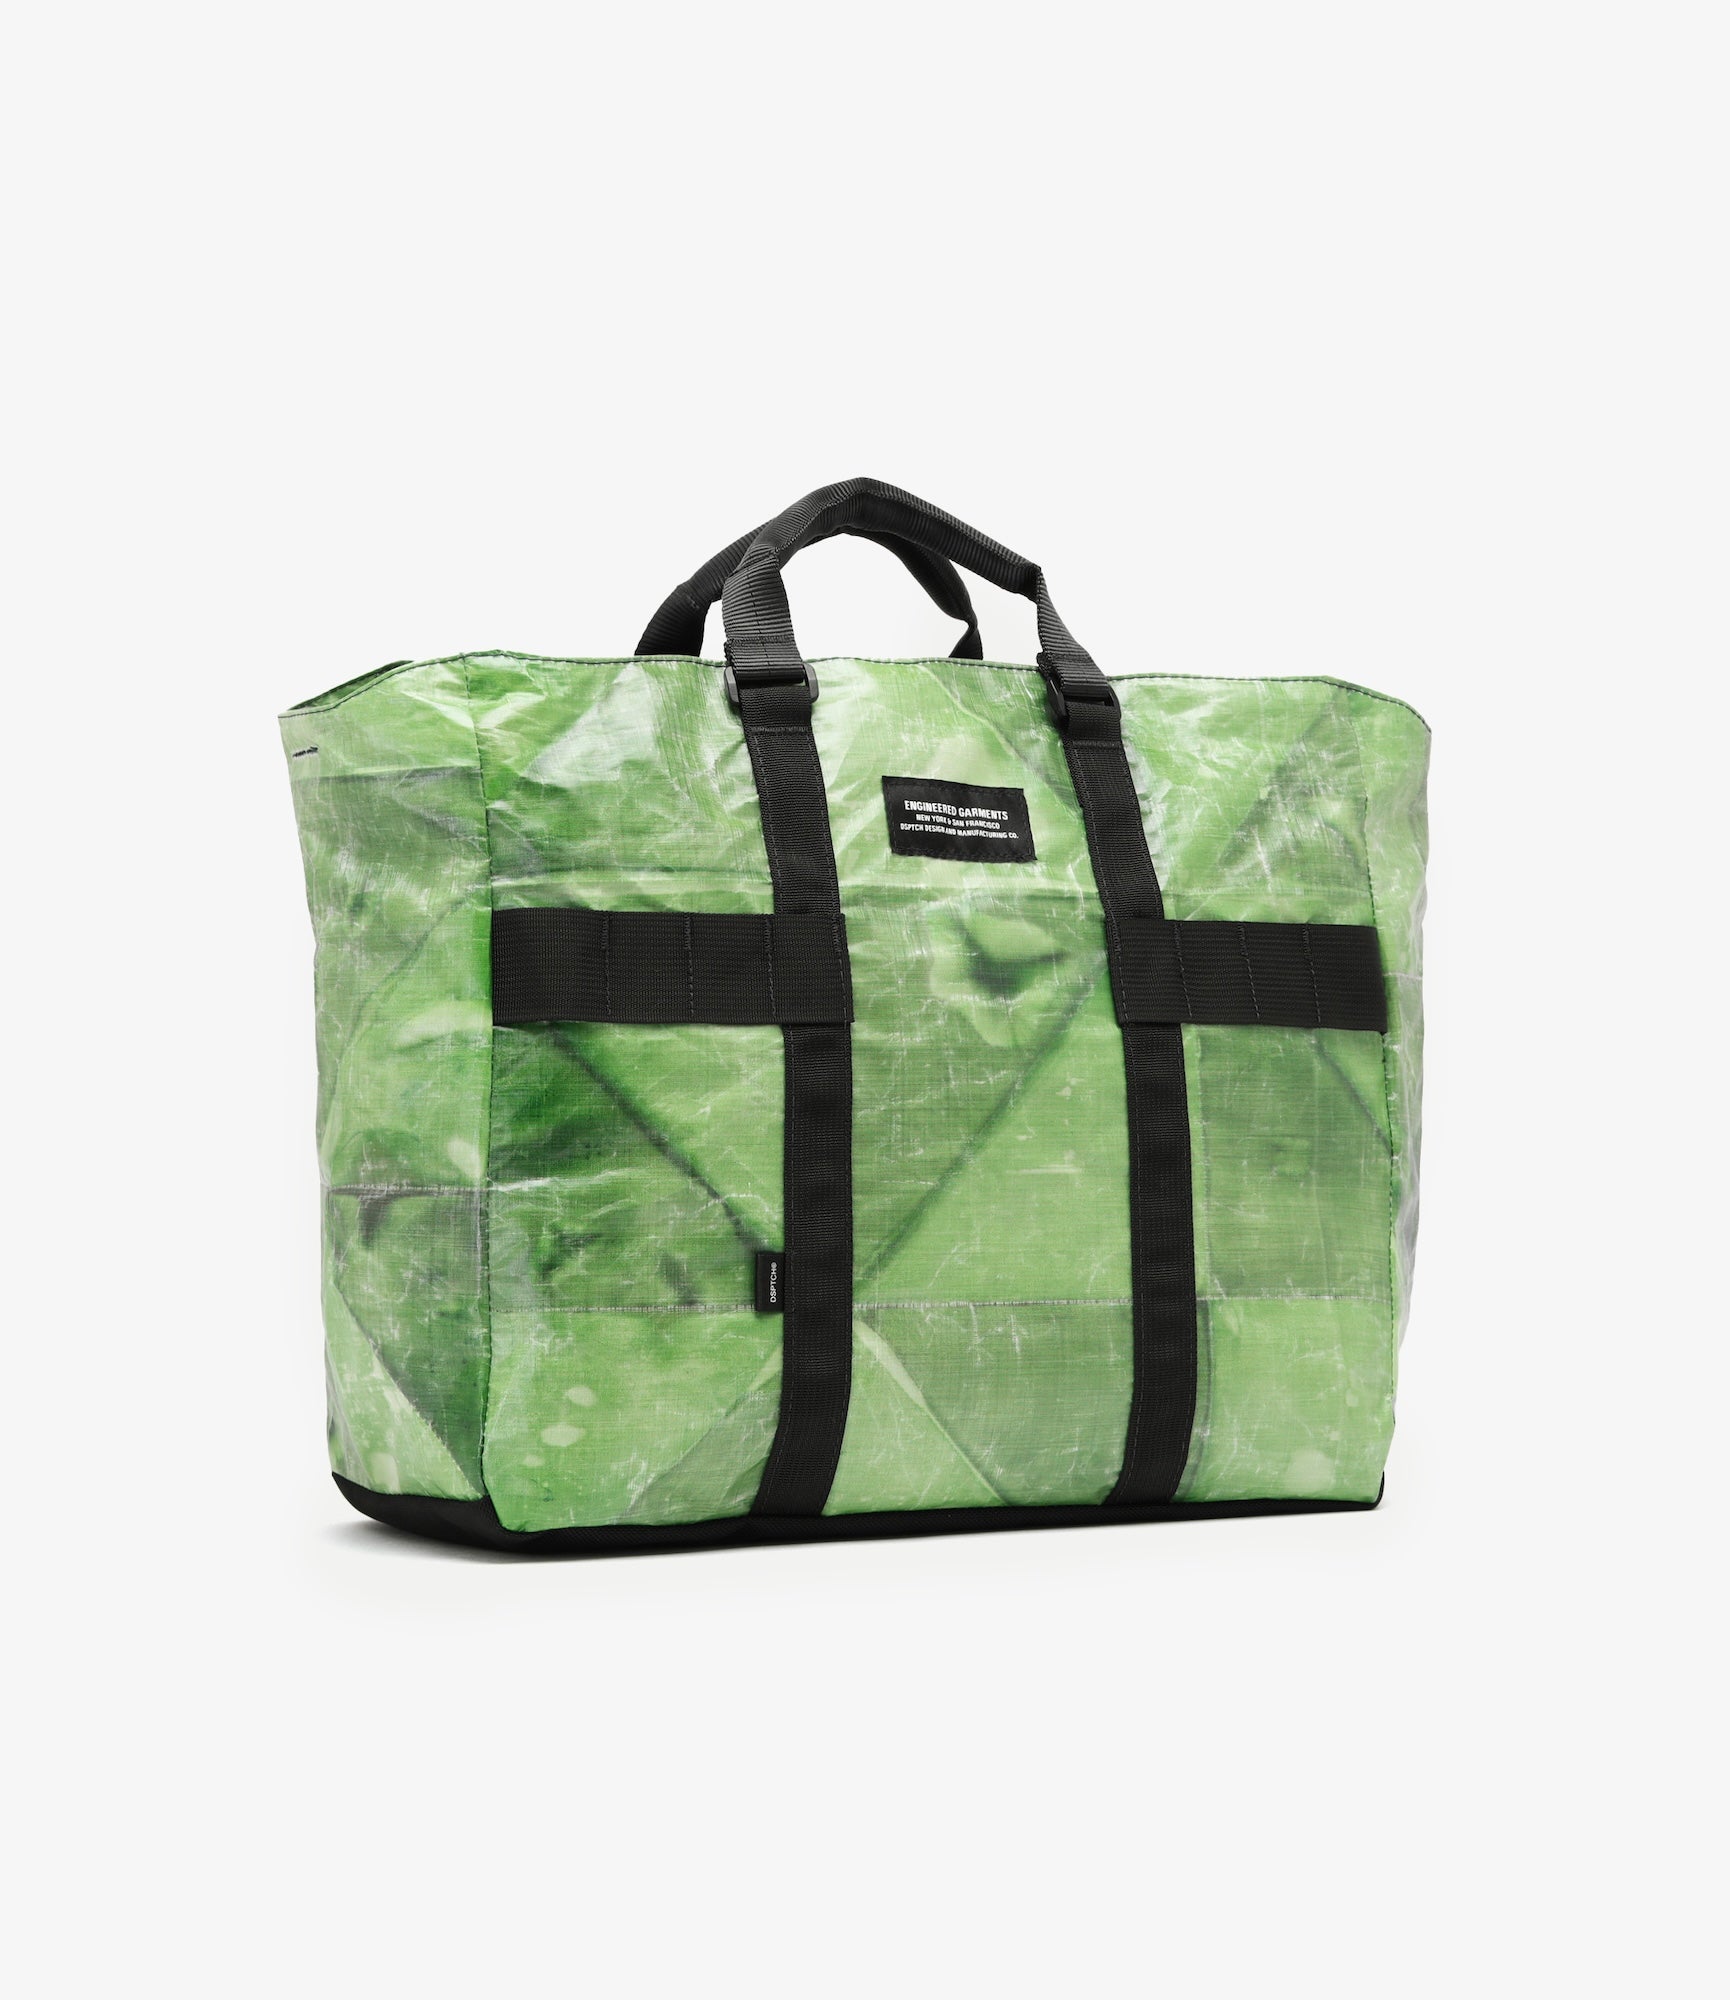 Engineered Garments x DSPTCH Utility Tote (Landscape) - Olive